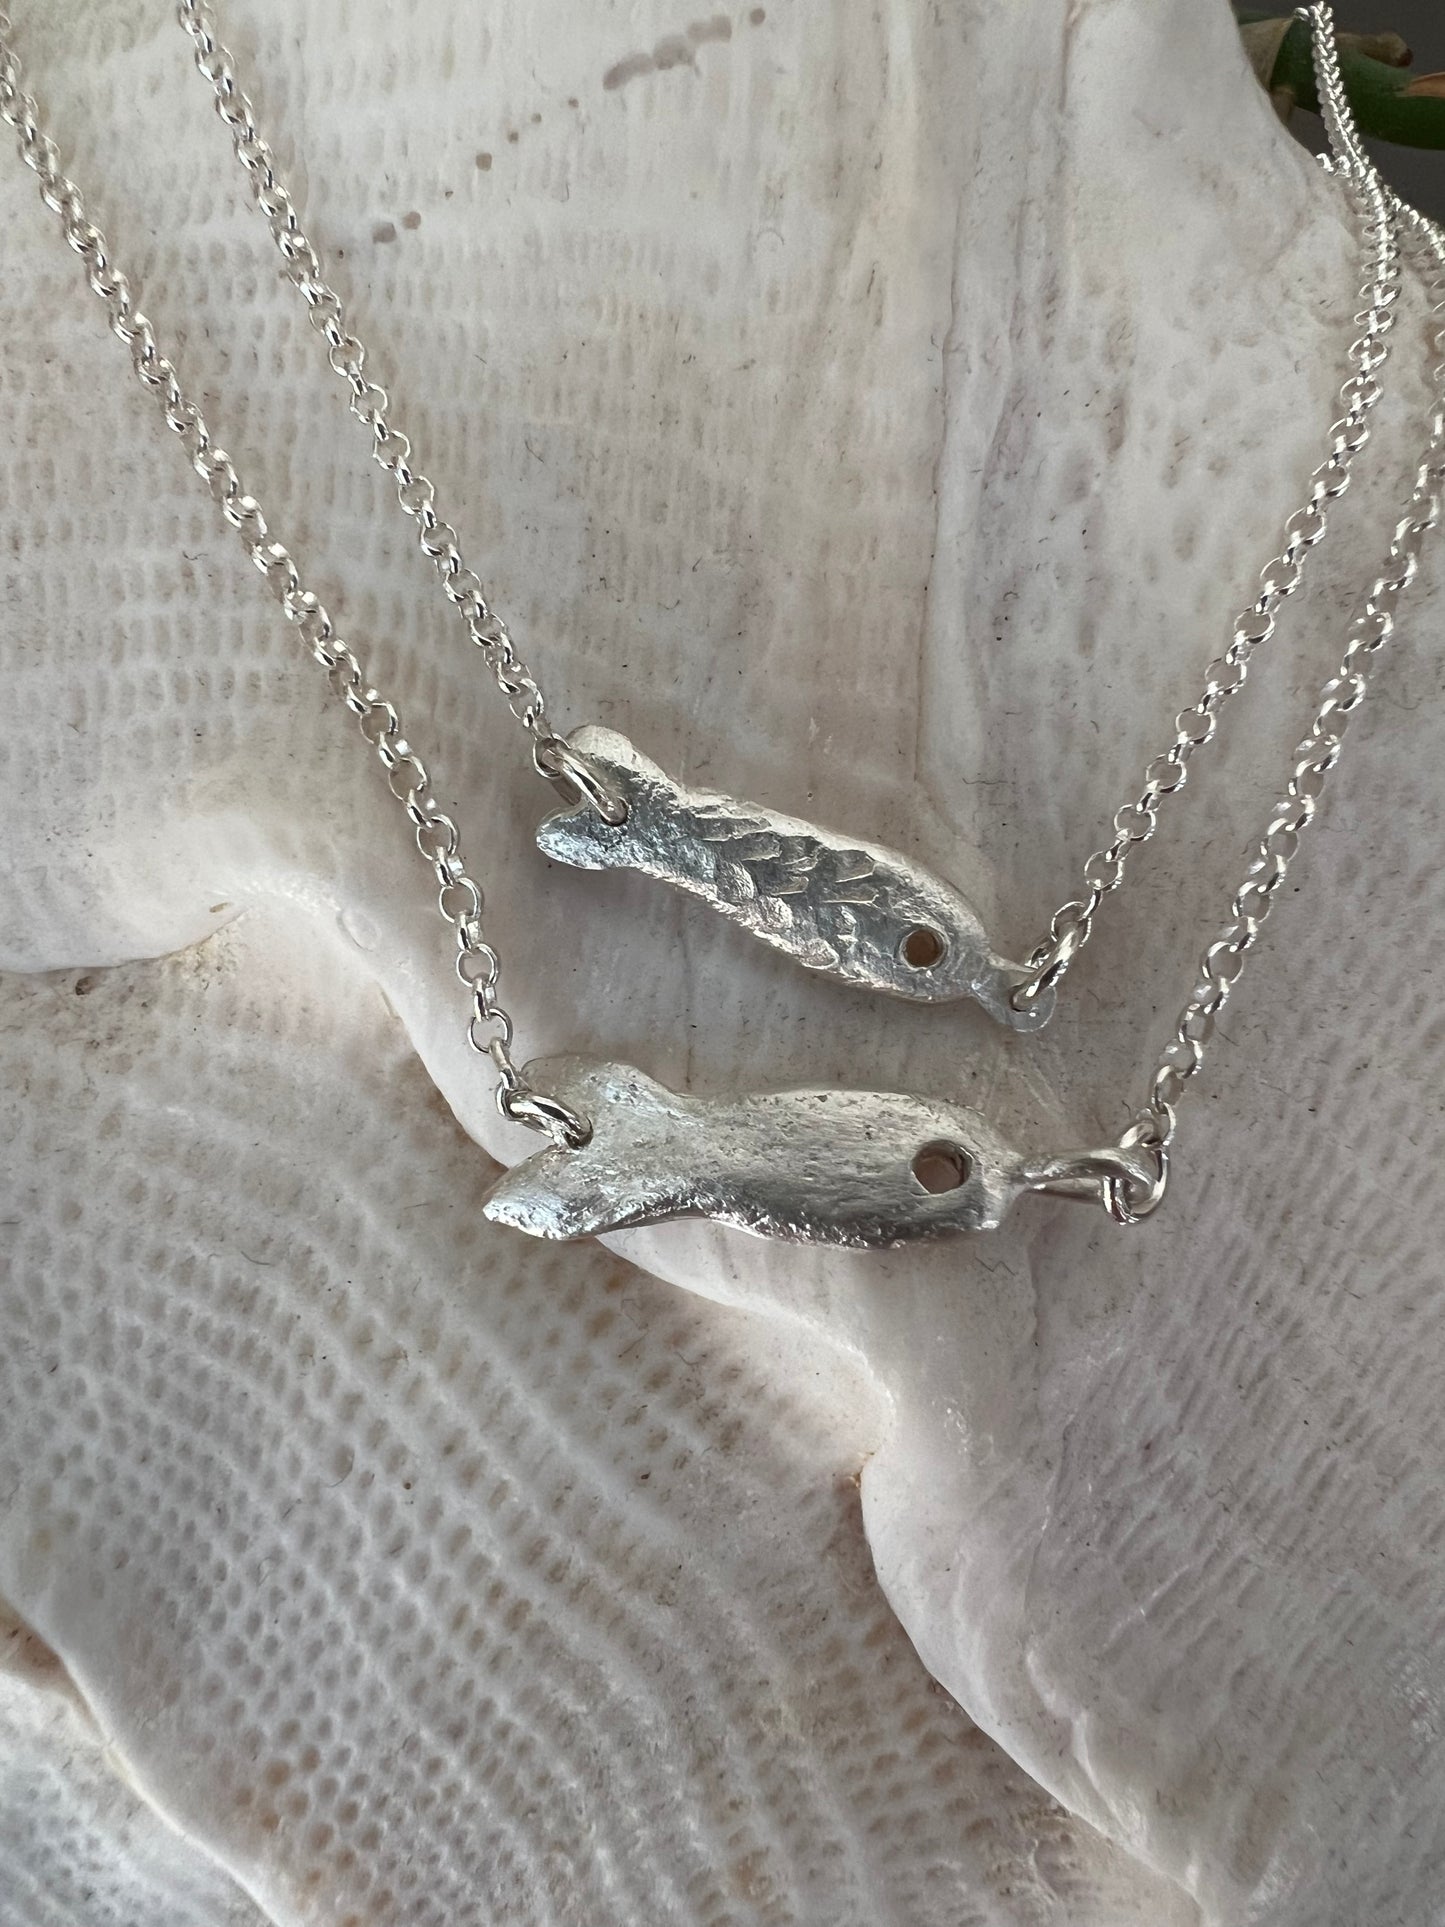 The Fish necklace